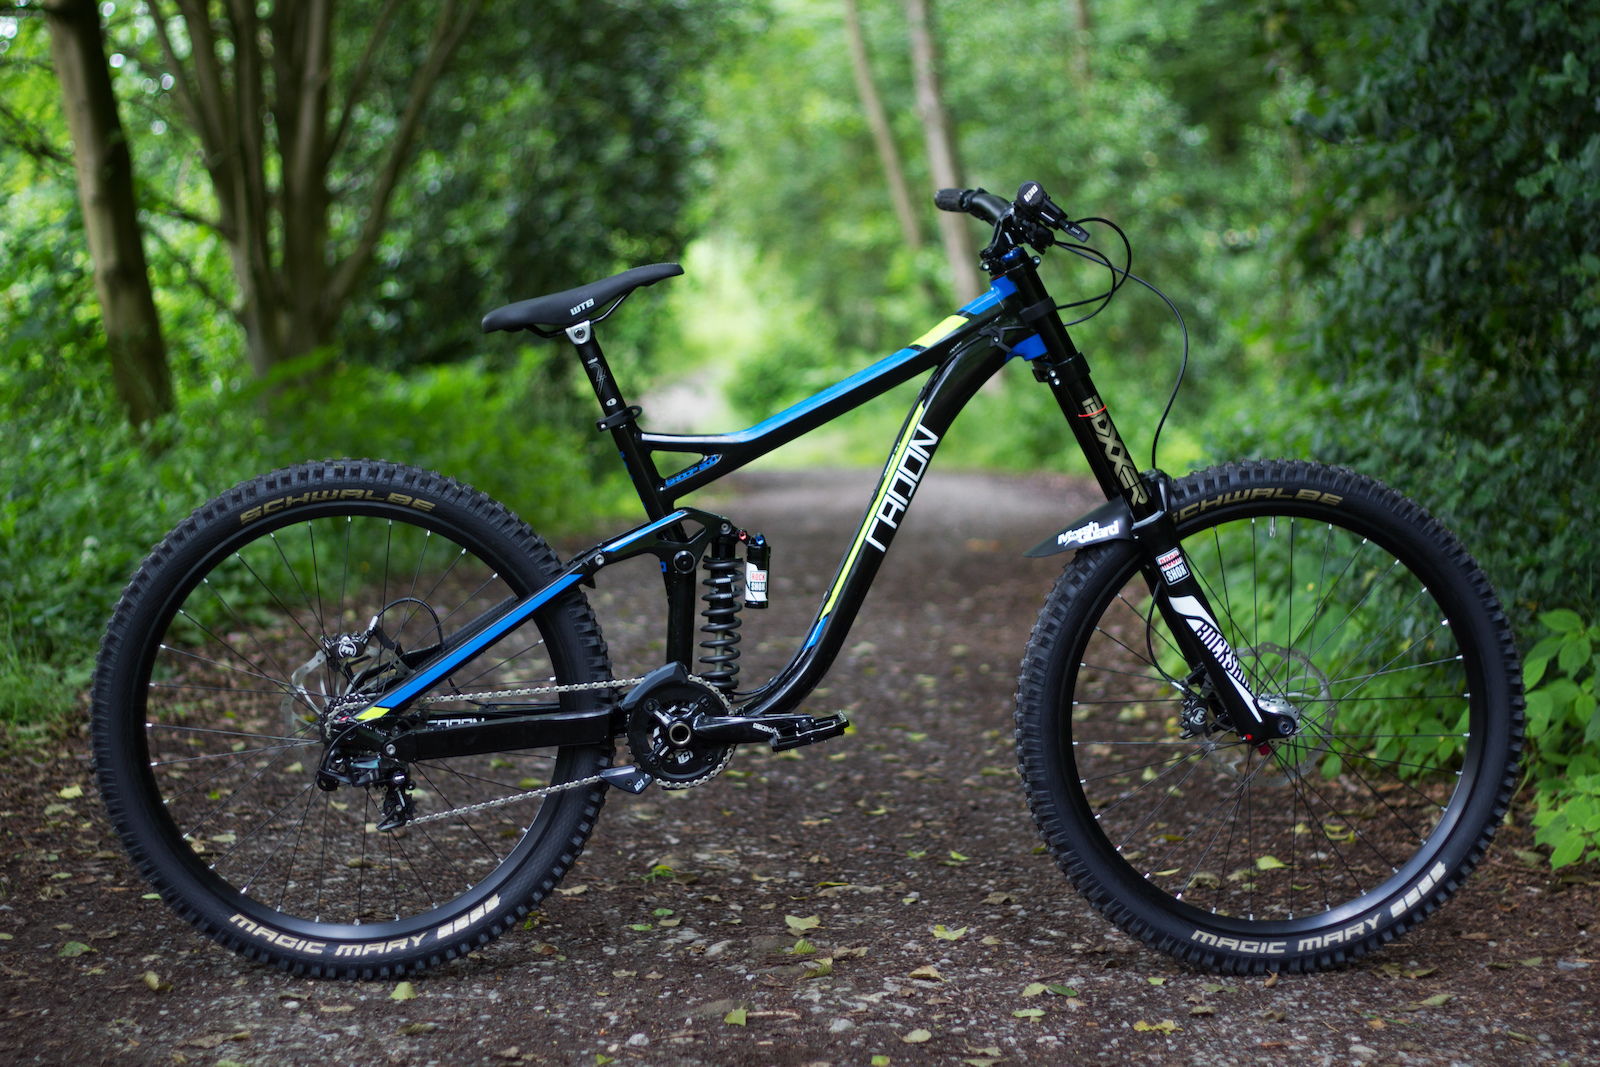 Radon Swoop 200 Team
Equipped with Sram